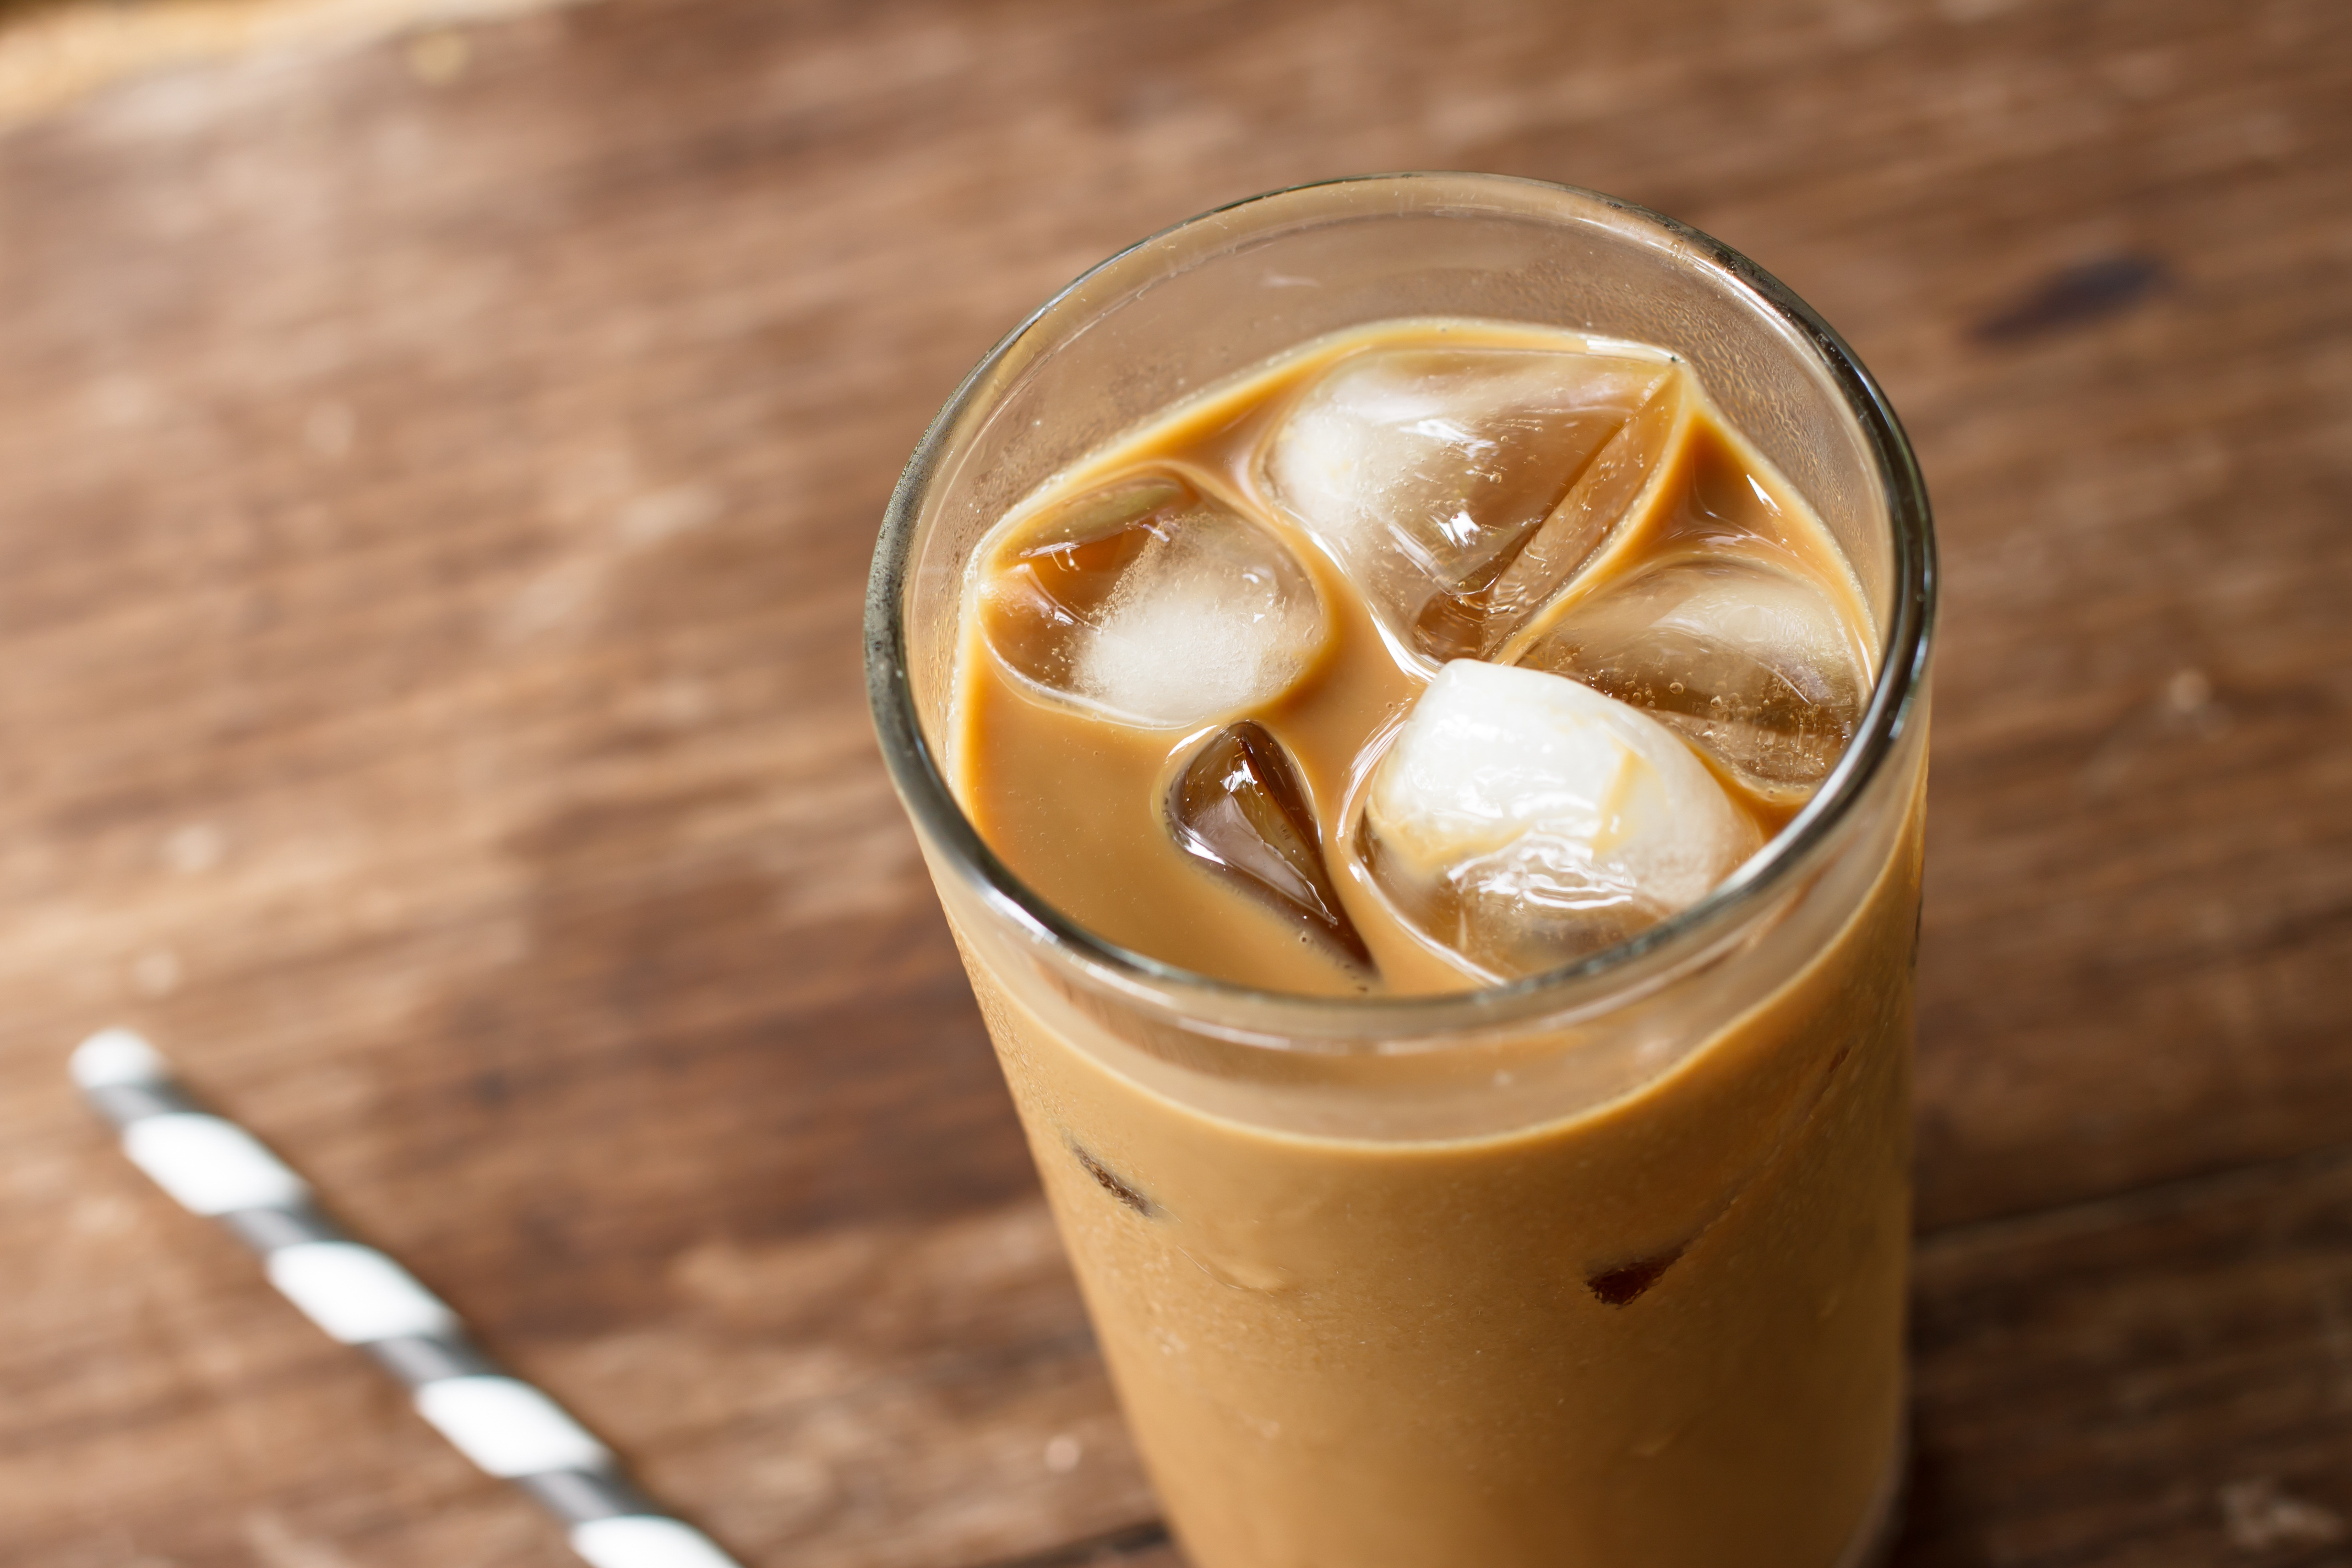 5 Tips for Making Great Iced Coffee at Home